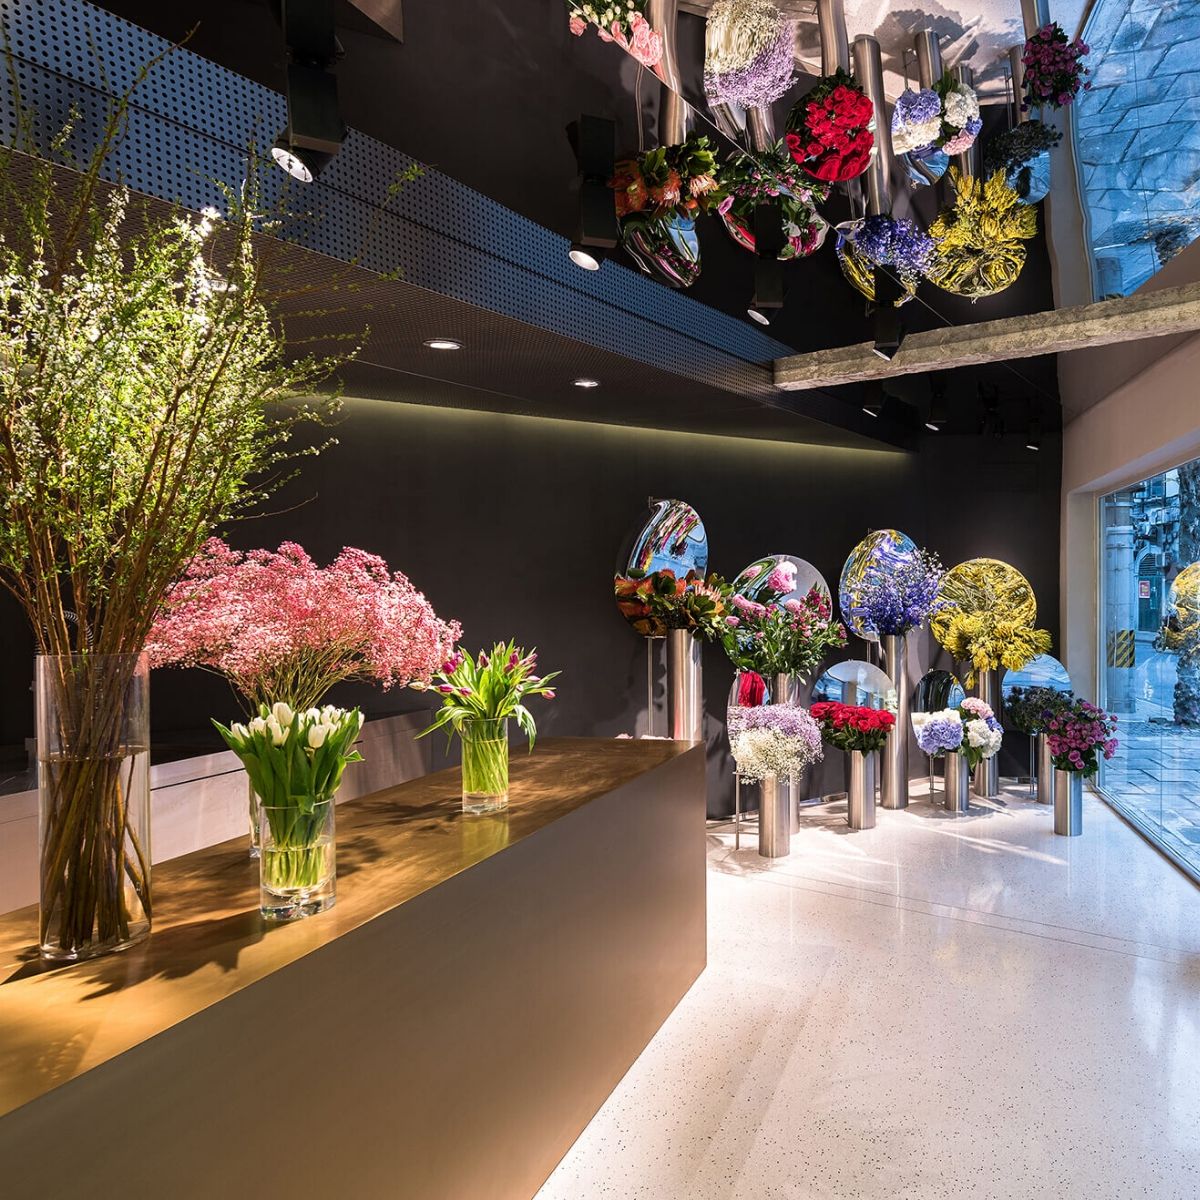 design-plays-a-key-role-in-the-blooming-business-of-flower-shops-featured